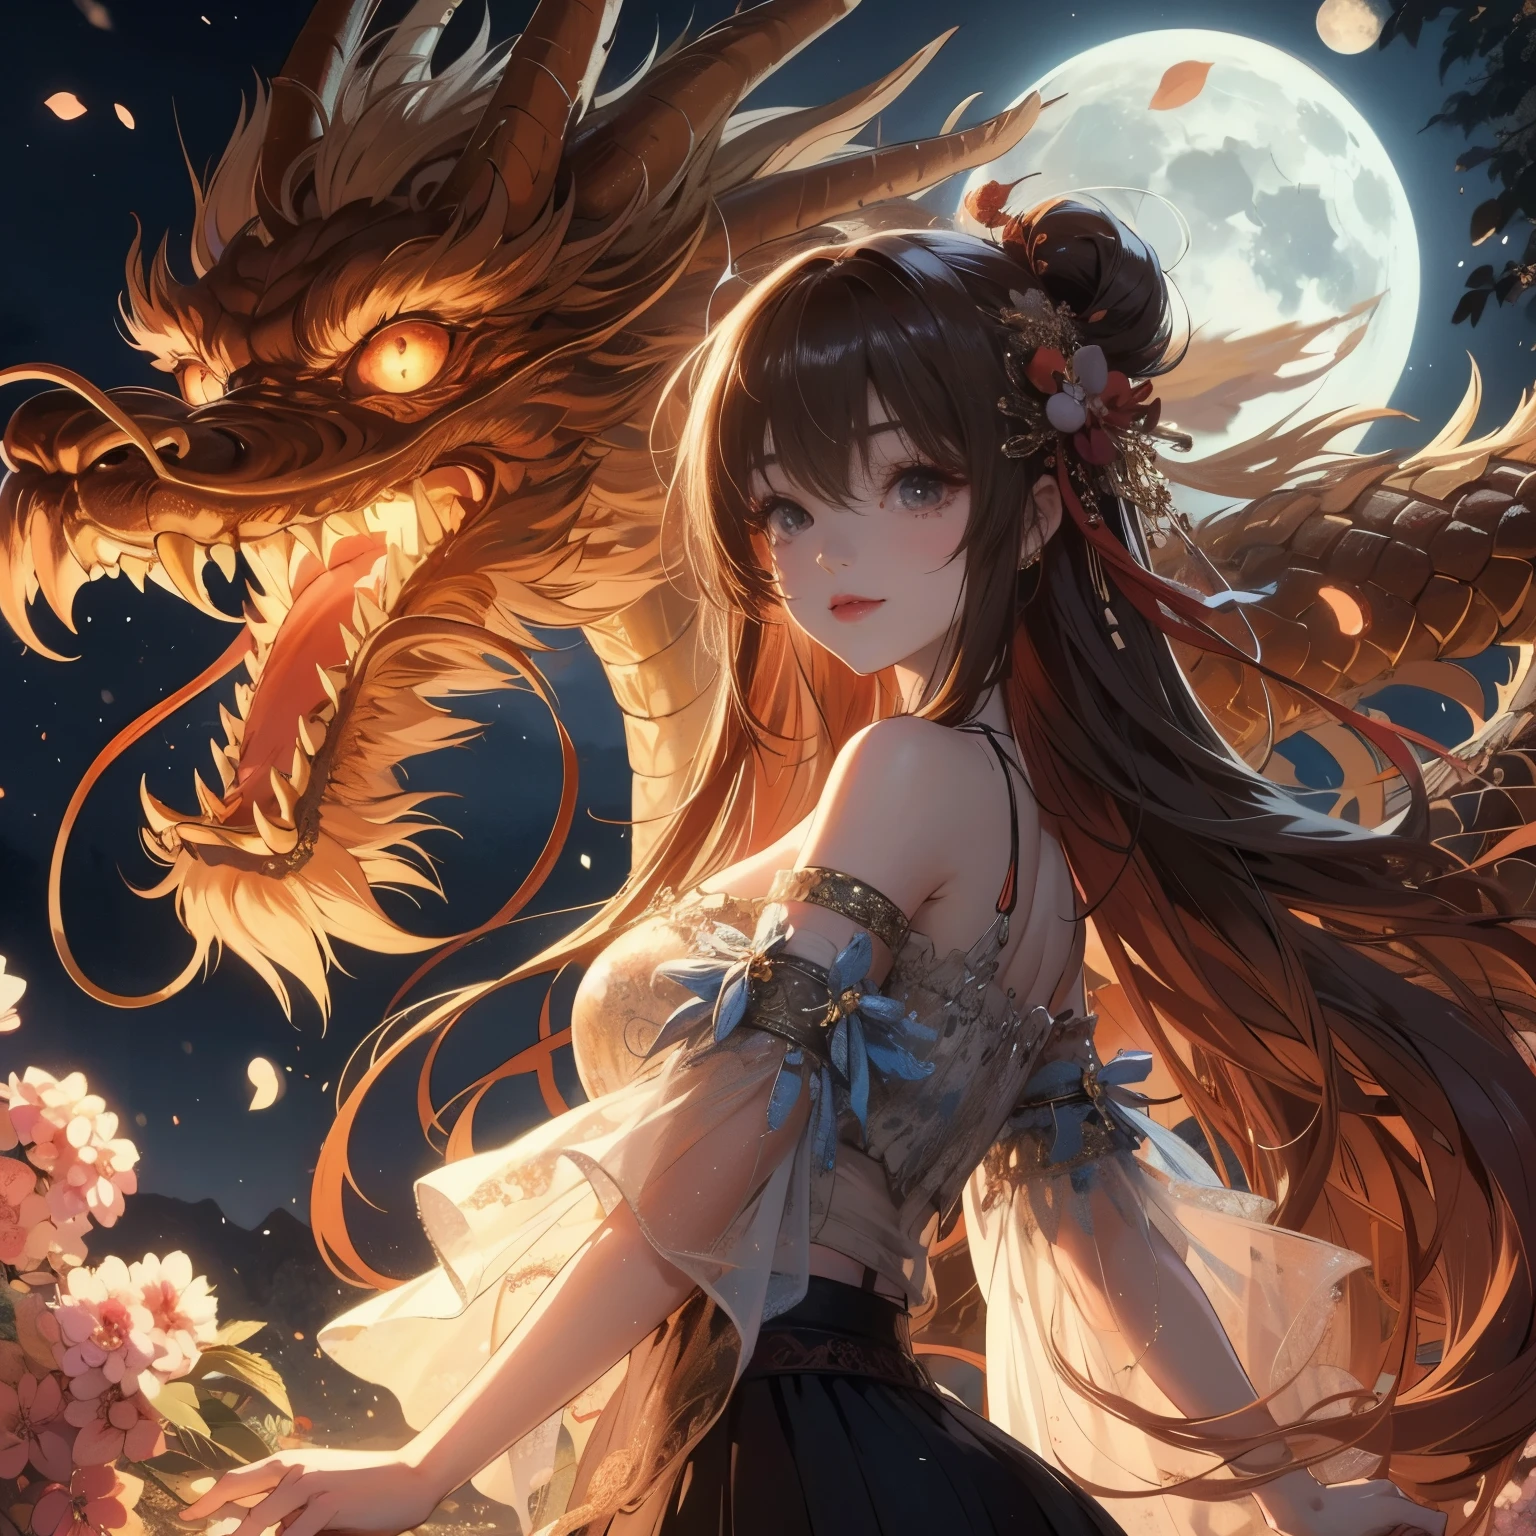 a girl with long hair and a dragon head is standing in front of a full moon, anime style 4 k, anime art wallpaper 8 k, anime art wallpaper 4 k, anime art wallpaper 4k, 4k anime wallpaper, anime wallpaper 4k, anime wallpaper 4 k, 4 k manga wallpaper, anime fantasy artwork, hd anime wallaper, beautiful fantasy anime